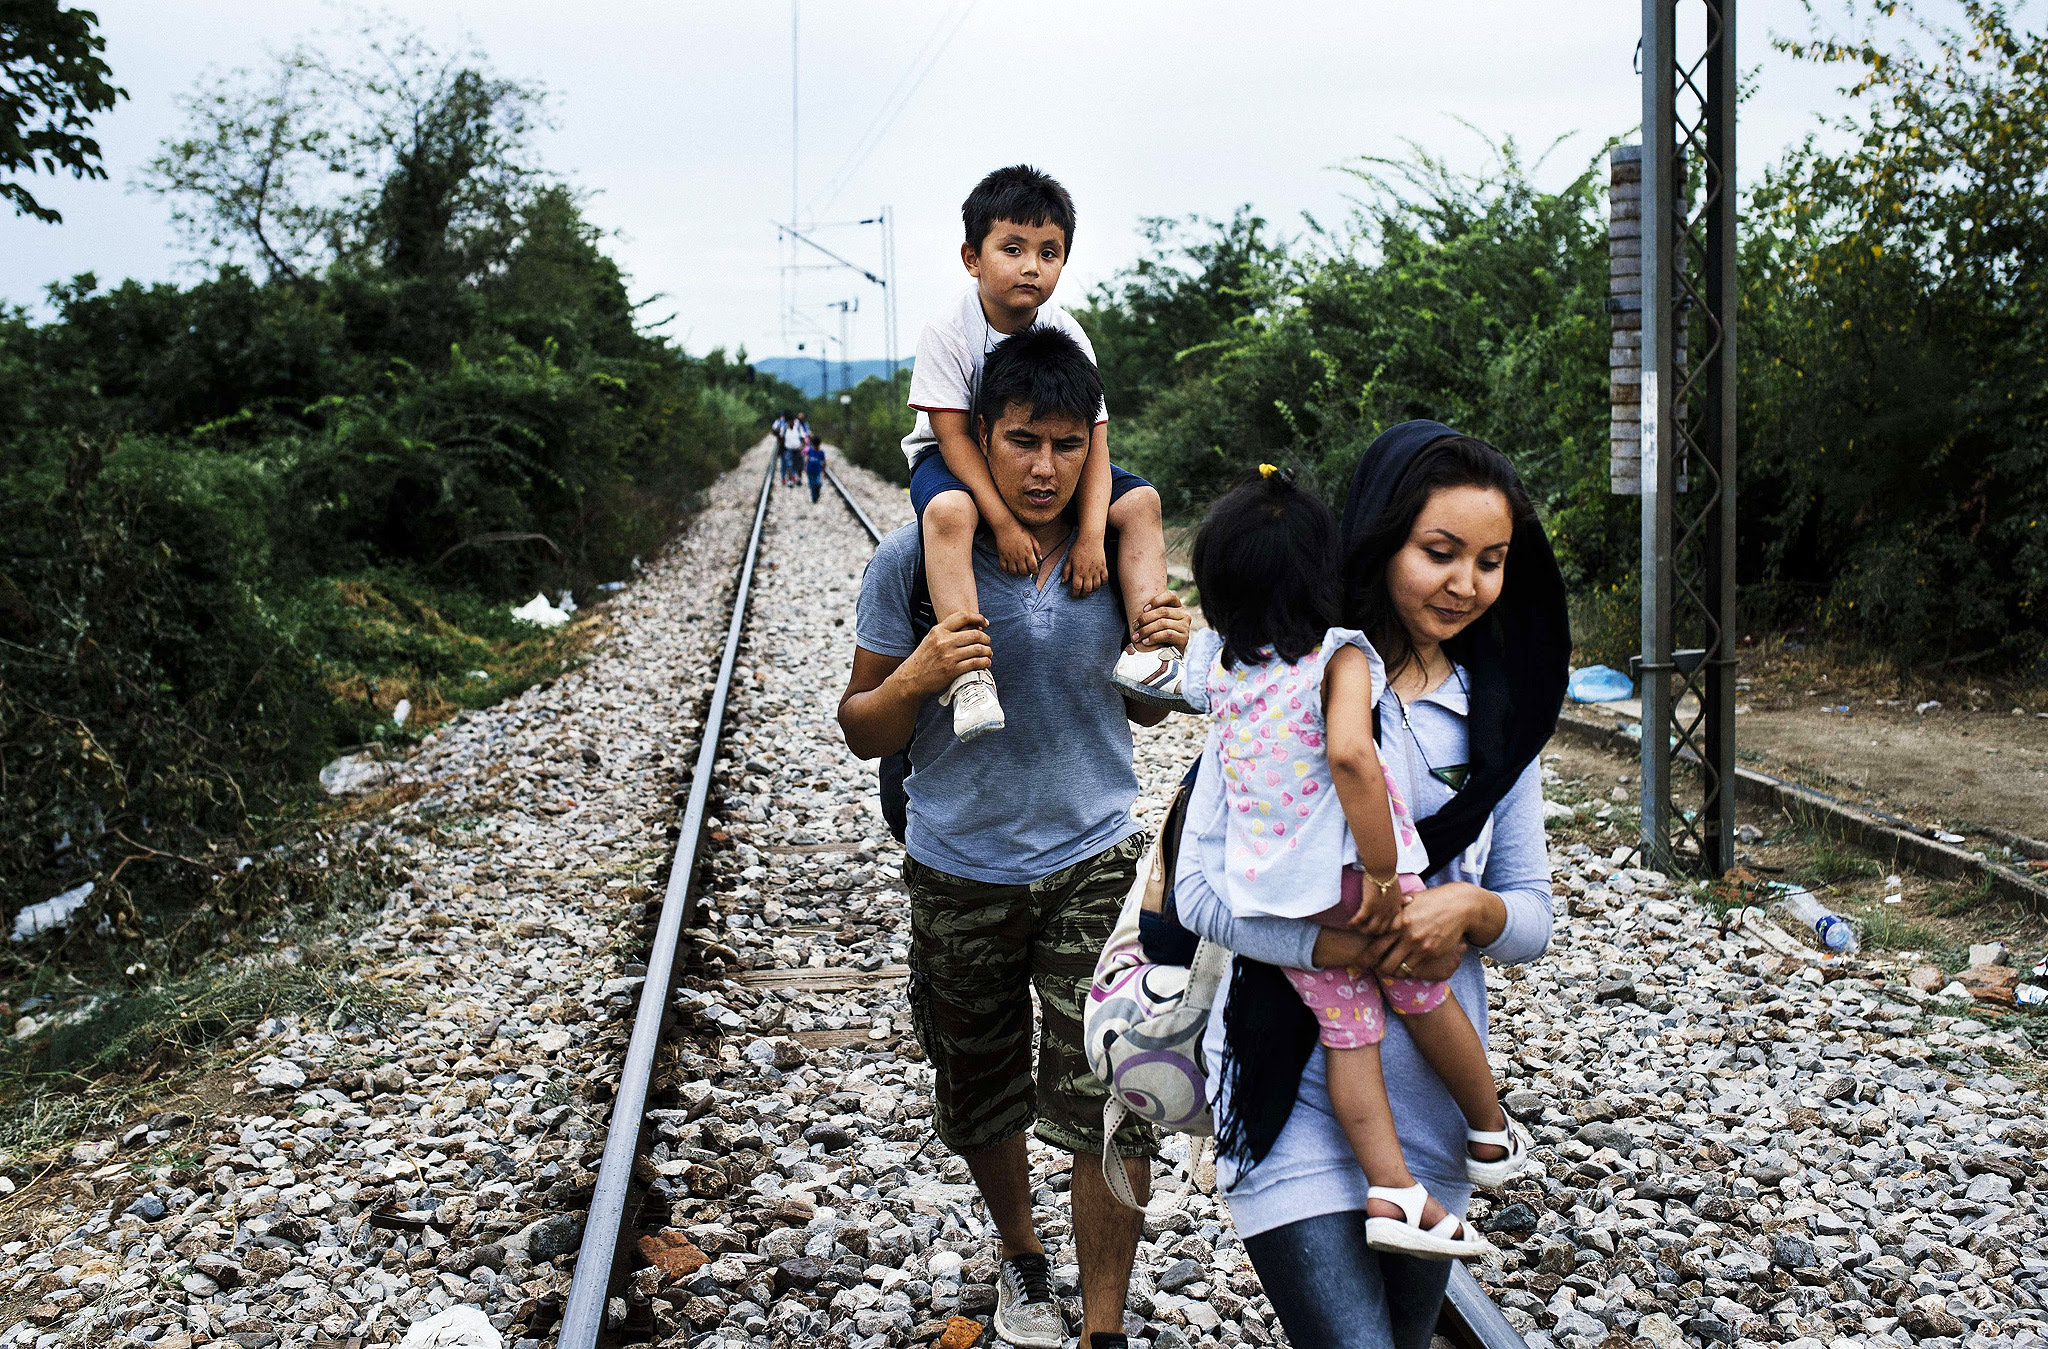 A migrant family walks on train tracks towards the town of Gevgelija, on the Macedonian-Greek border, on August 6, 2015. Many migrants try to cross Macedonia and Serbia to enter the European Union via Hungary, a country that will finish building its anti-migrant fence on its southern border with Serbia by August 31, ahead of a previous November deadline